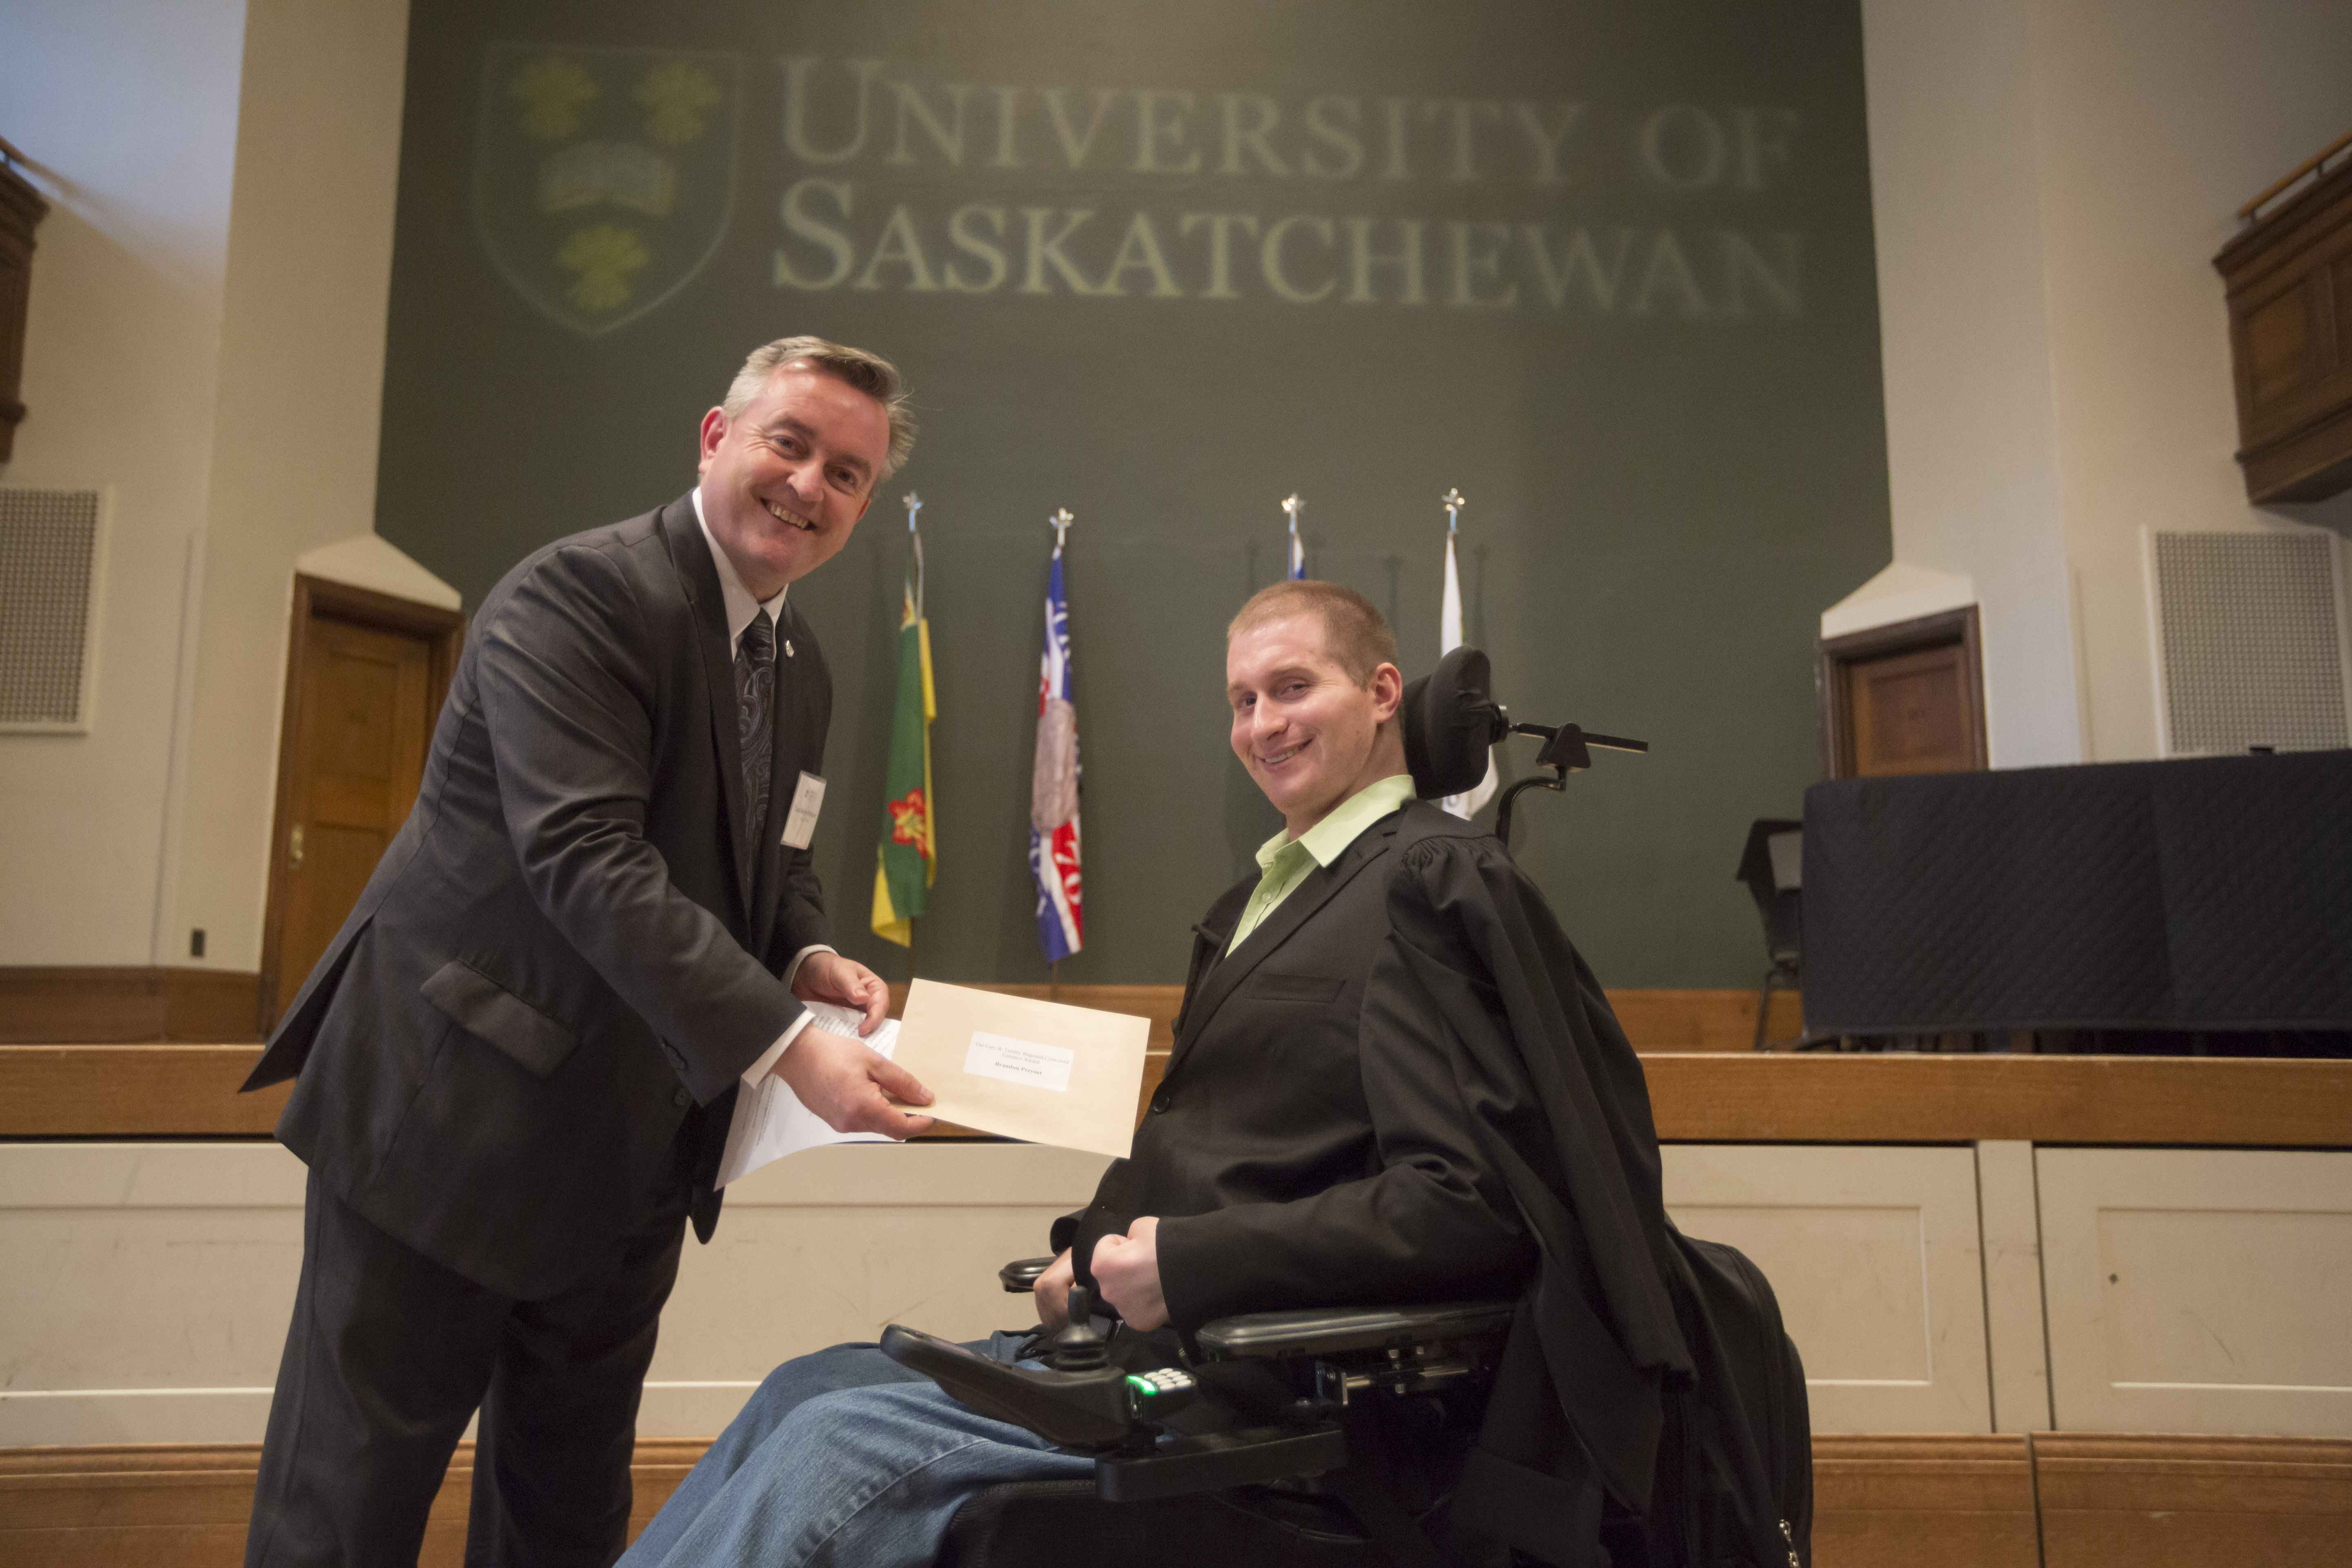 First year student Brandon Prevost receives the The Gary and Tammy Bugeaud Centennial Entrance Award.